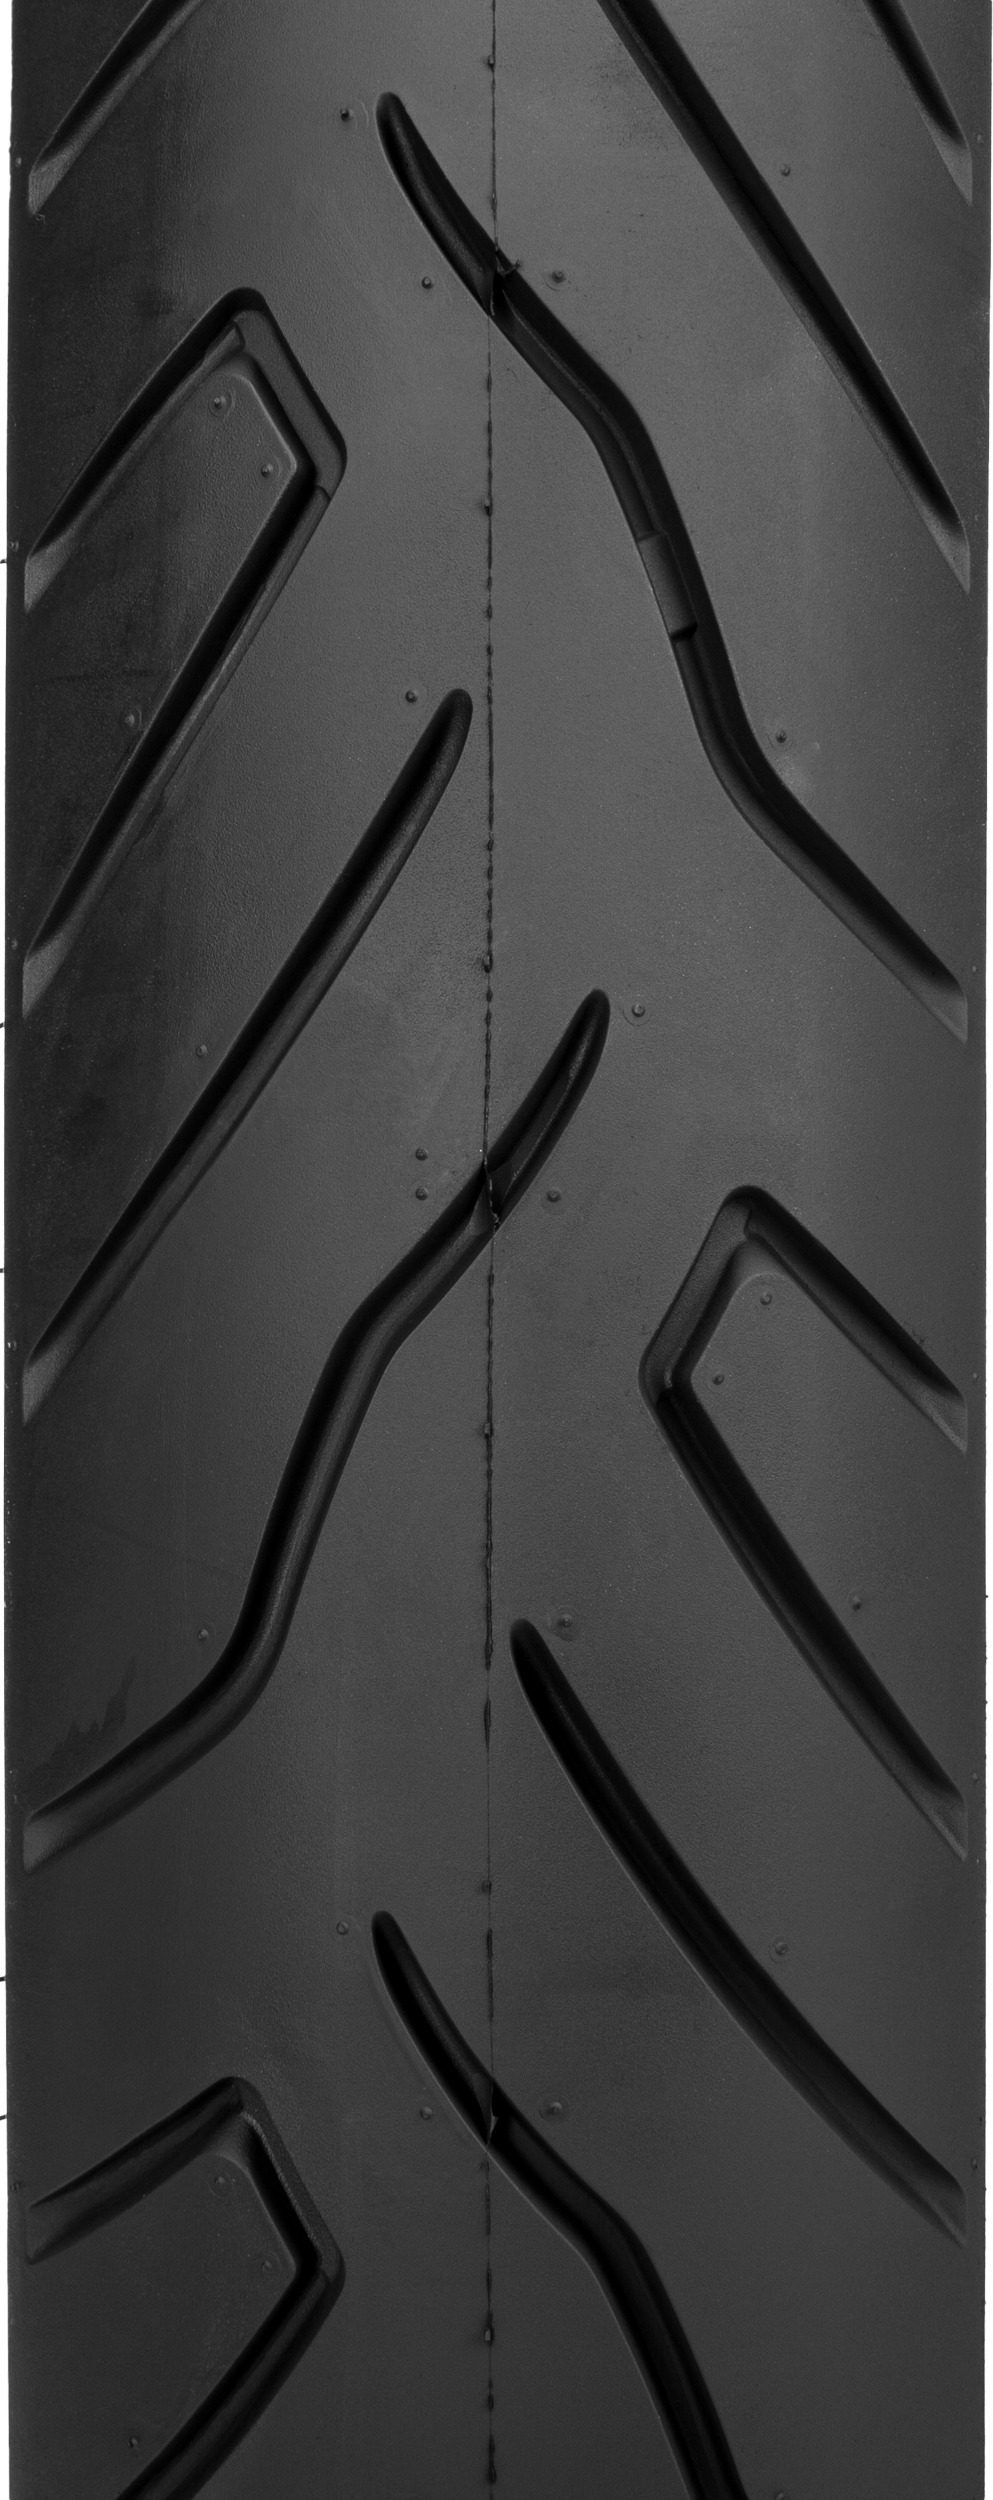 100/90-19 61H Front Tire, Black Wall - SR 999 "Long Haul" Cruiser - Heavy Duty, Belted Bias, Long Life Touring Tire - Click Image to Close